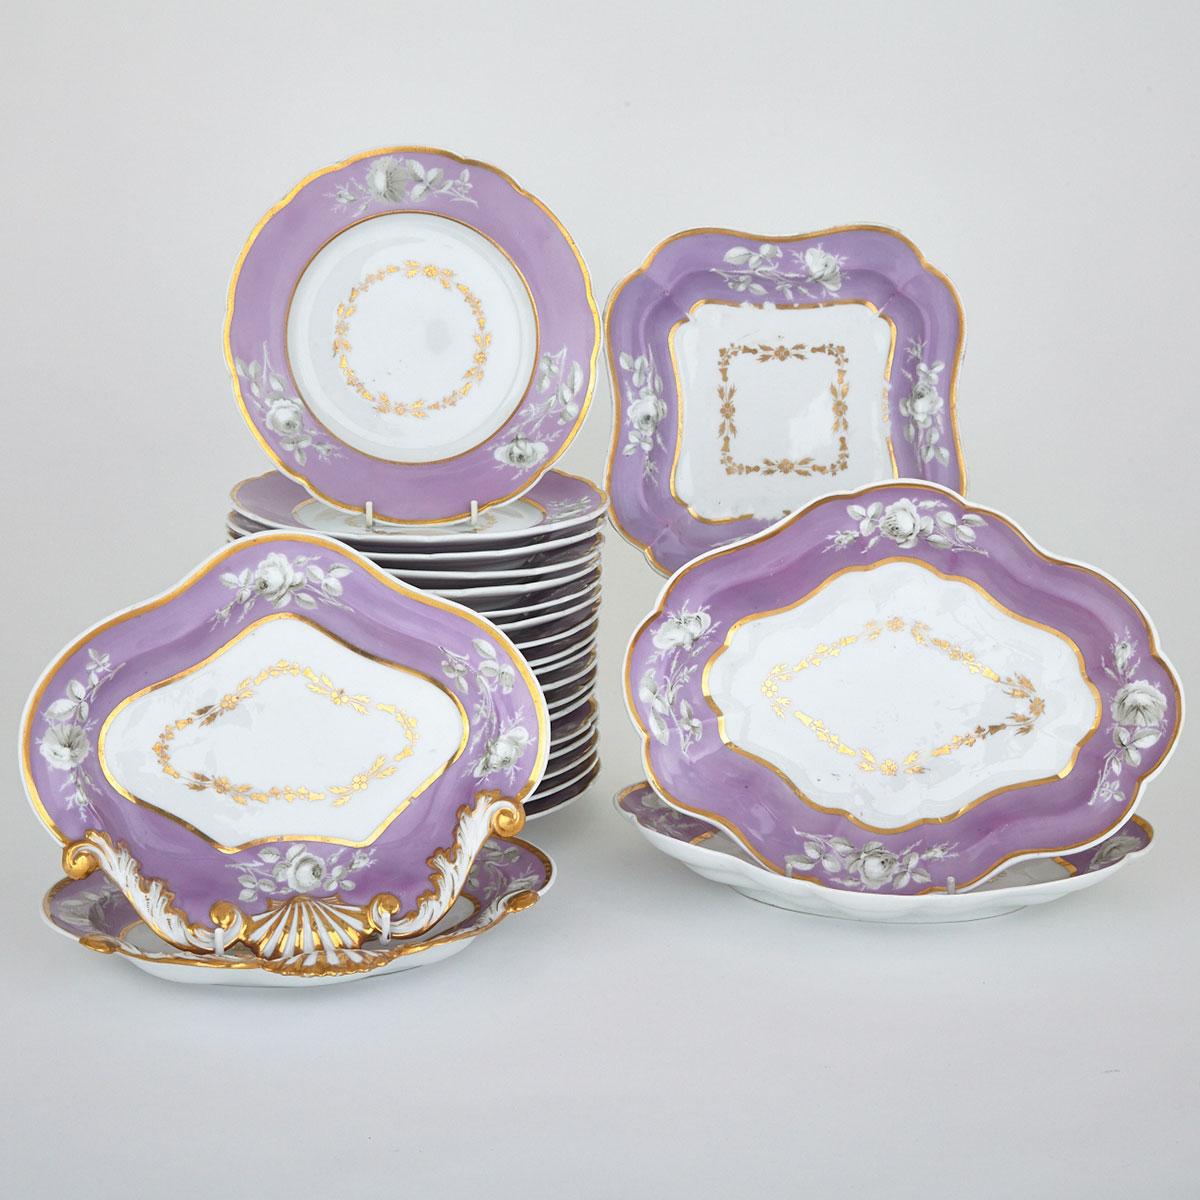 Chamberlain’s Worcester Lilac Banded Dessert Service, c.1825